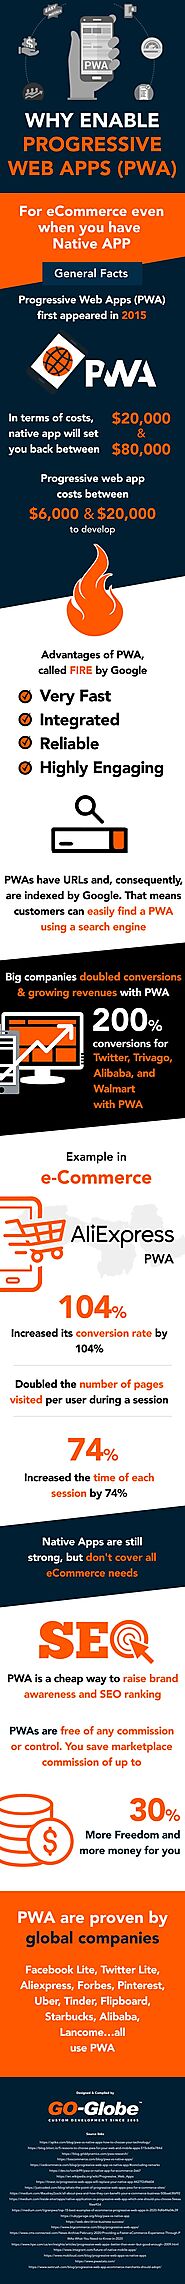 Why enable Progressive Web Apps (PWA) For eCommerce even when you have Native APP [Infographic] | GO-Gulf.